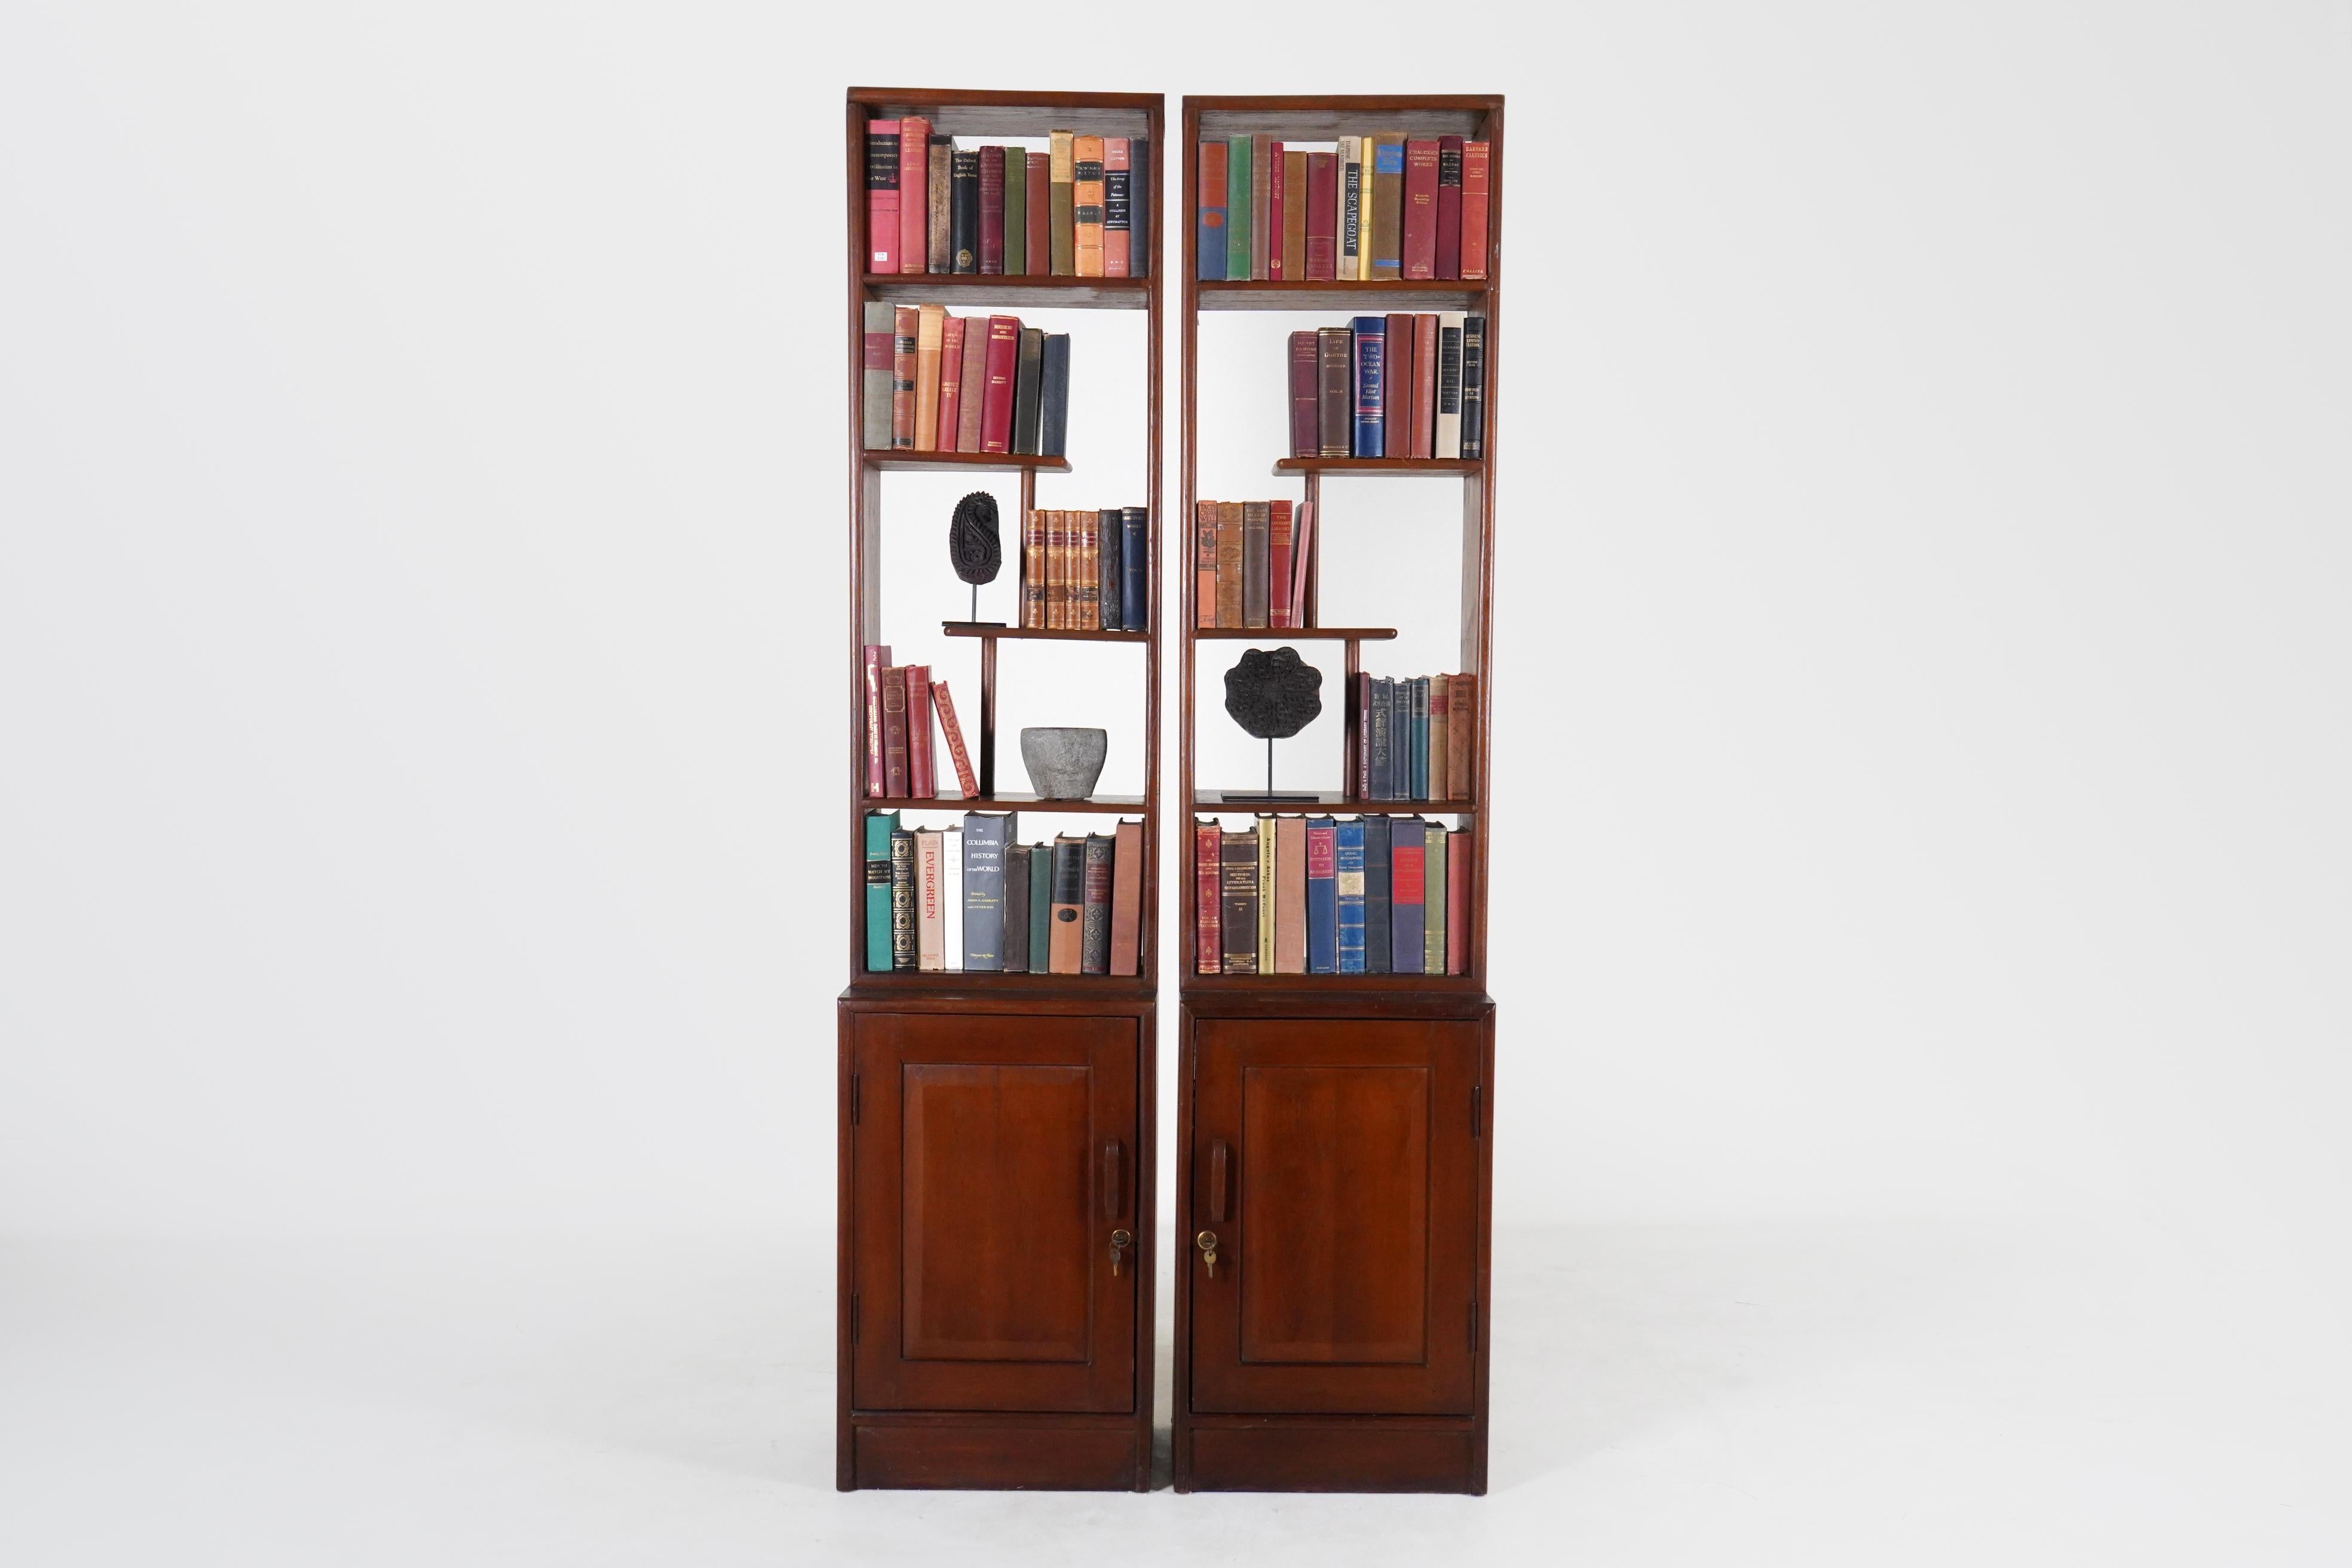 This open antique bookshelf was made from solid teak wood and dates to the 19th Century. During the British Empire in India and Burma much furniture was made in the Anglo-Indian style using native hardwoods and native craftsmen. Styles closely